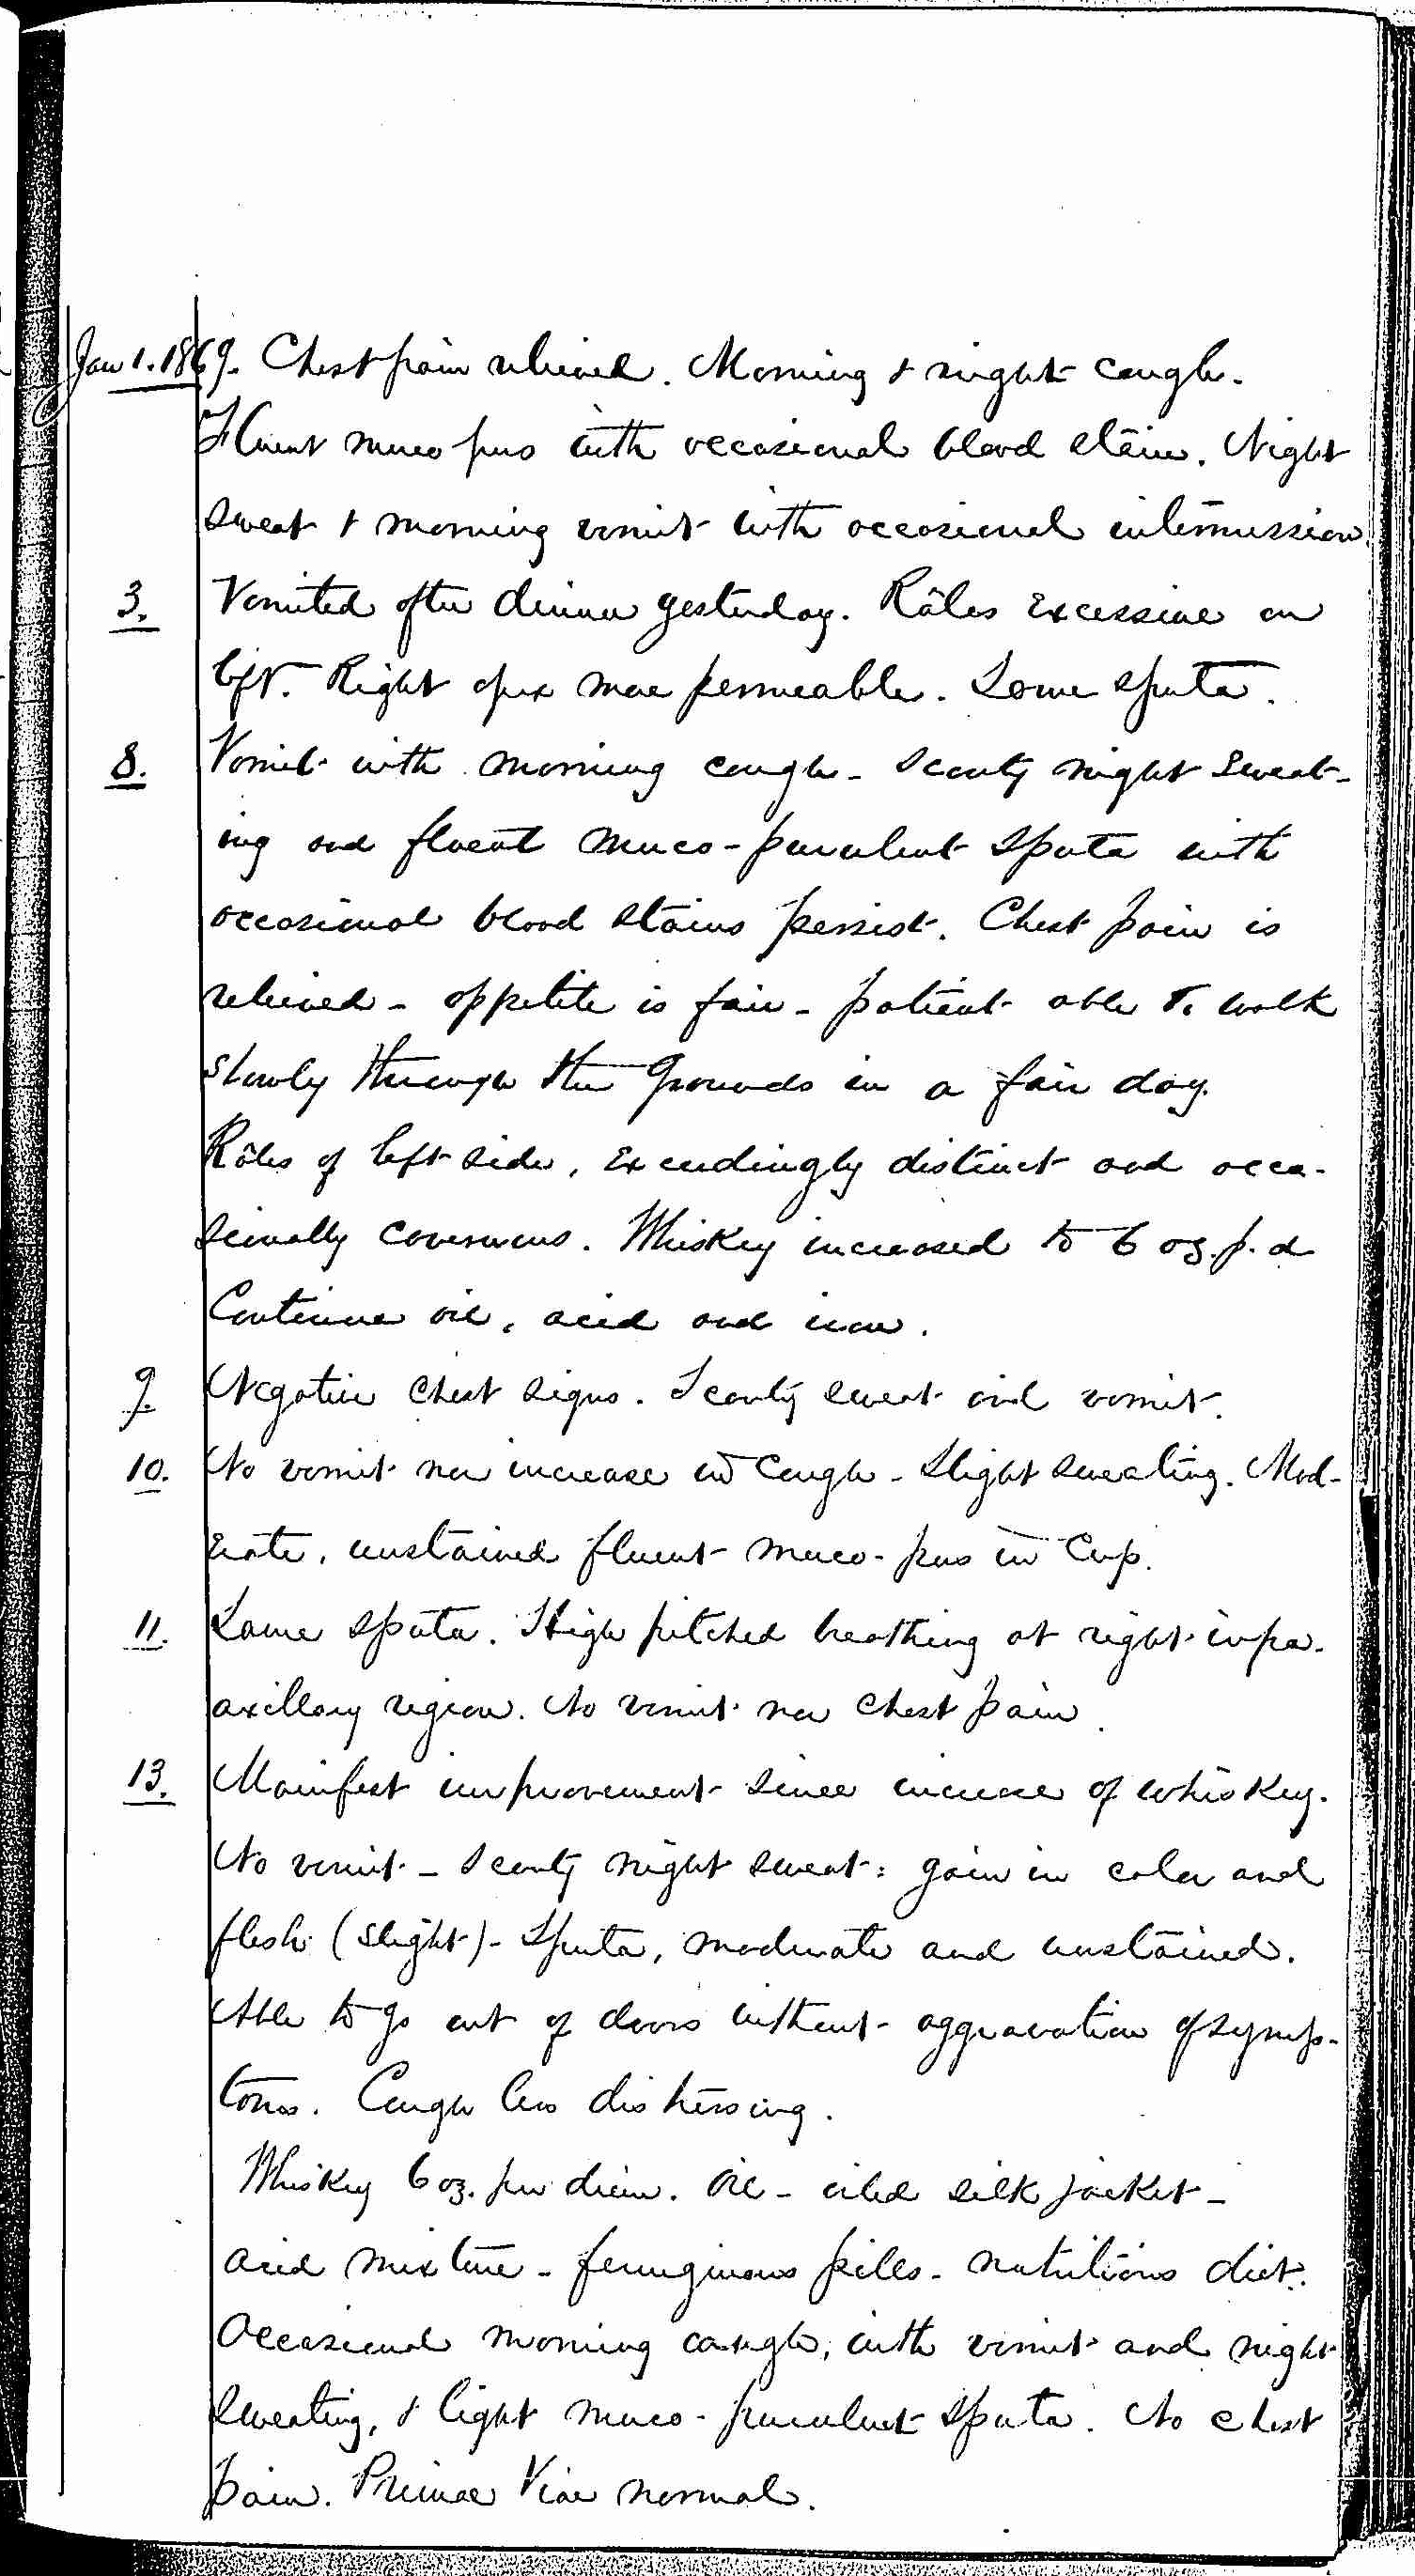 Entry for Hugh Riley (page 21 of 31) in the log Hospital Tickets and Case Papers - Naval Hospital - Washington, D.C. - 1868-69